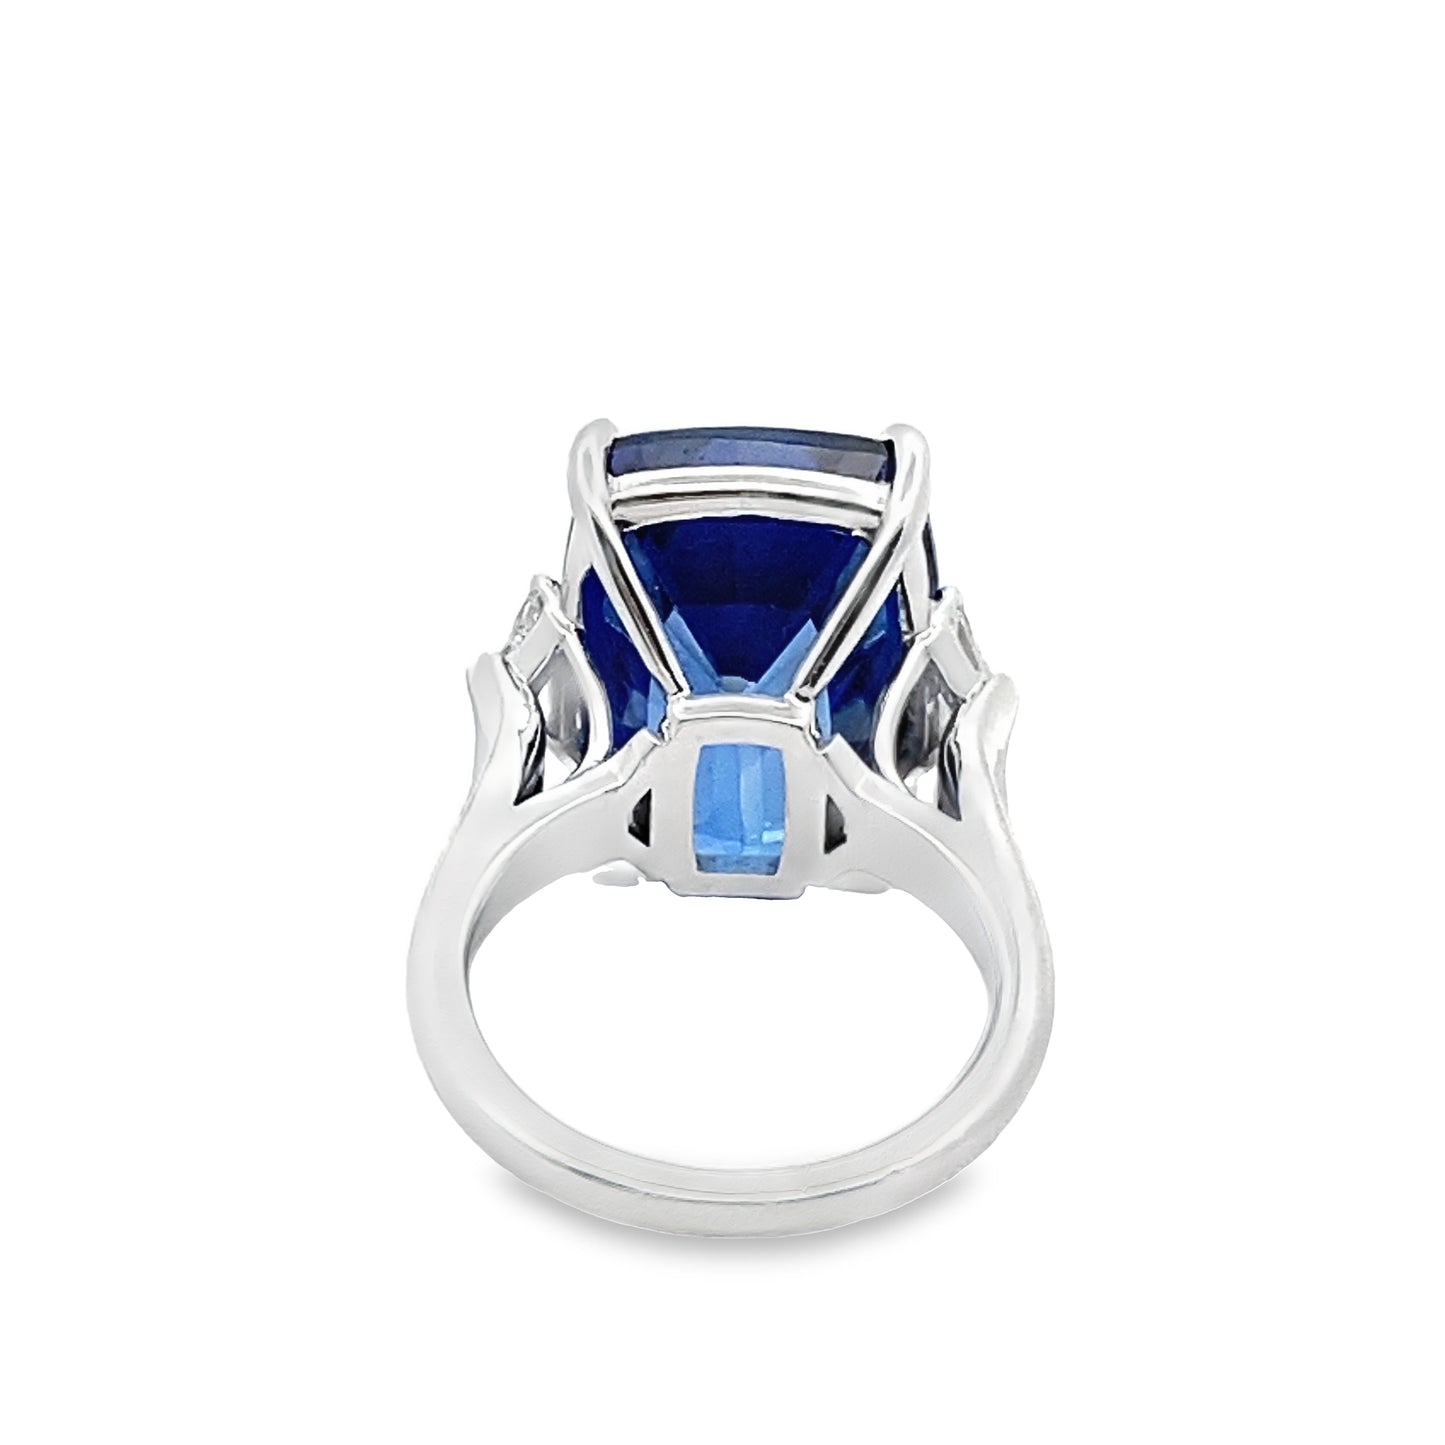 Blue Sapphire Ring with Diamond in 14K White Gold